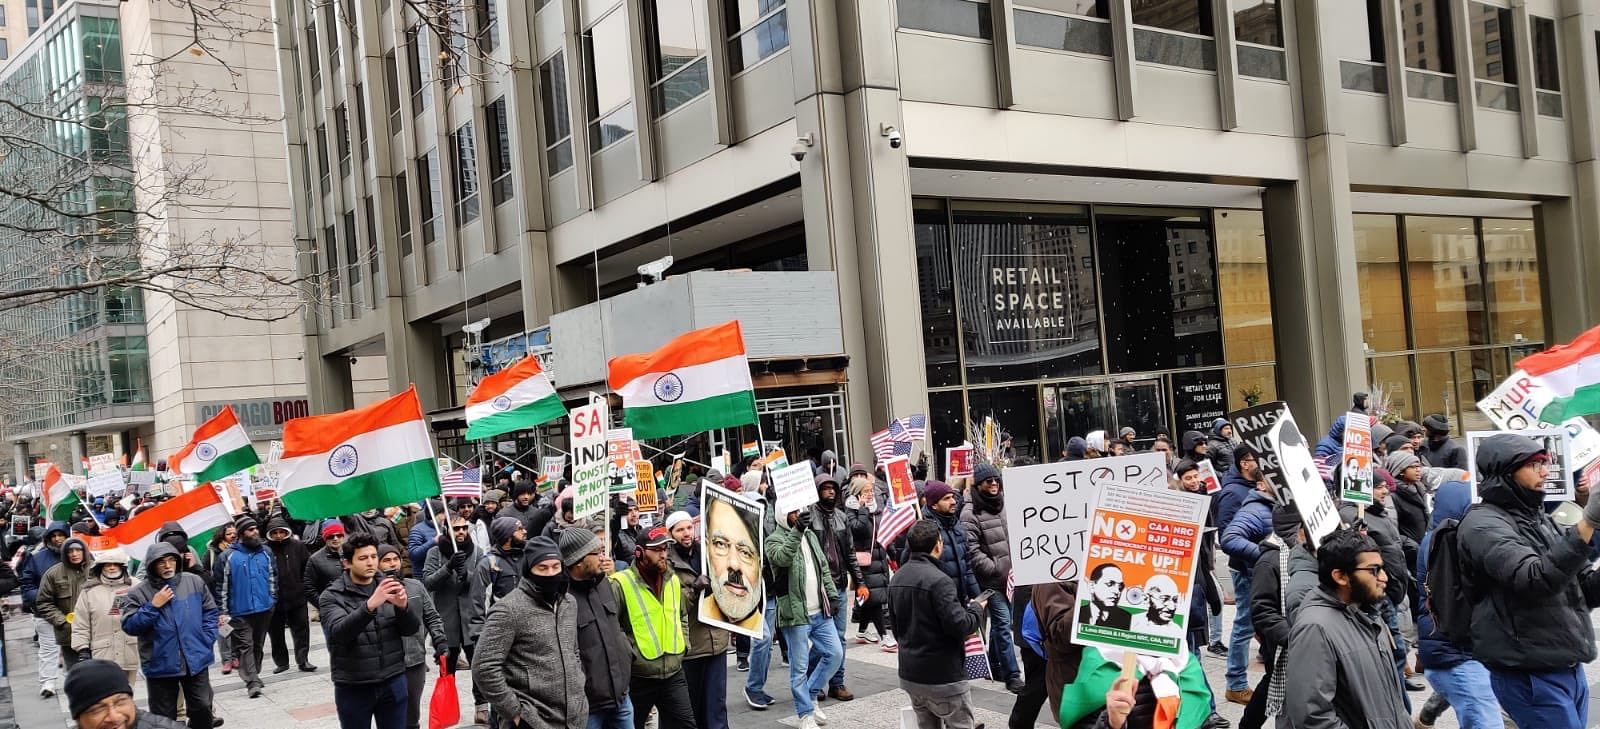 In some of the cities, particularly New York, Chicago, Houston, Atlanta and San Francisco having Indian consulates, and at the Indian Embassy in Washington DC, the protestors shouted slogans like “Bharat Mata Ki Jai” and “Hindu, Muslim Sikh, Isai: Aapas Mein Sab Bhai Bhai”. Credit: Twitter (@IndianAmerican6)